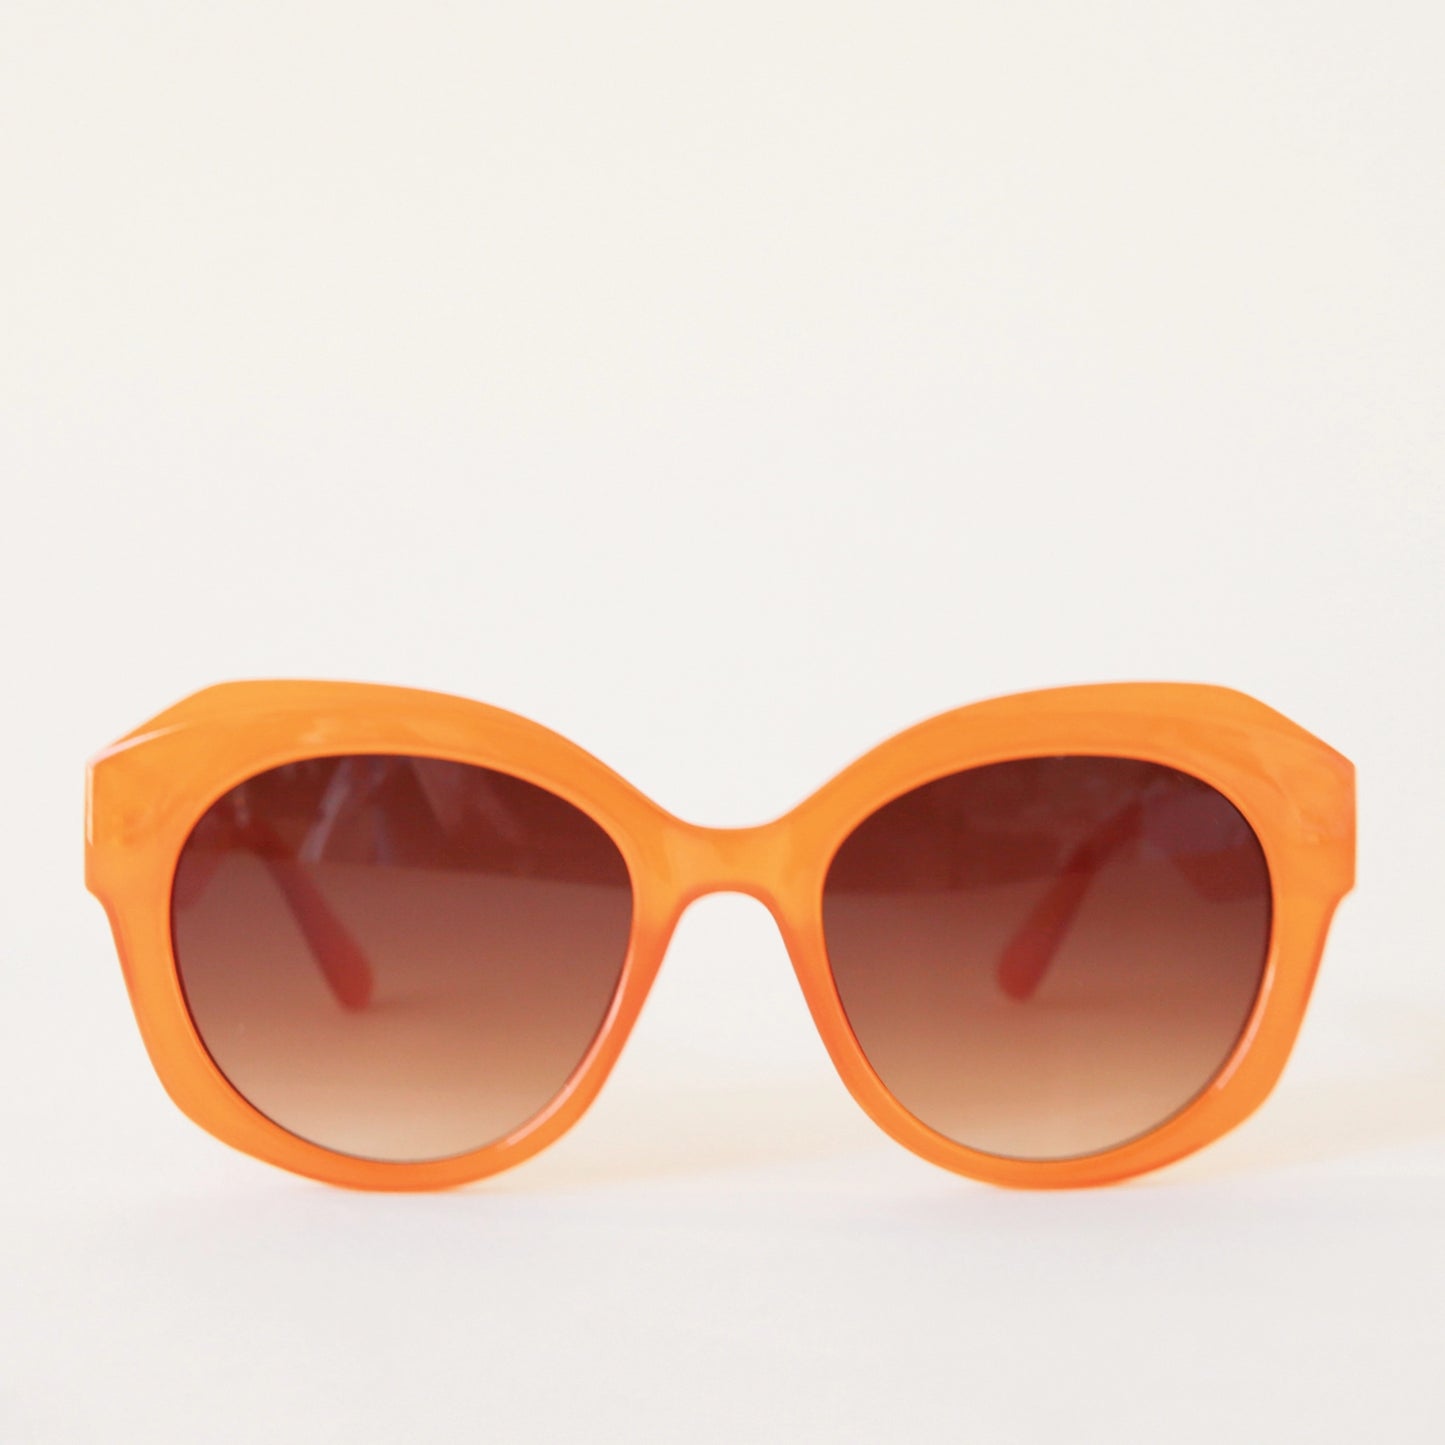 Chunky round orange sunglasses with a brown lens.